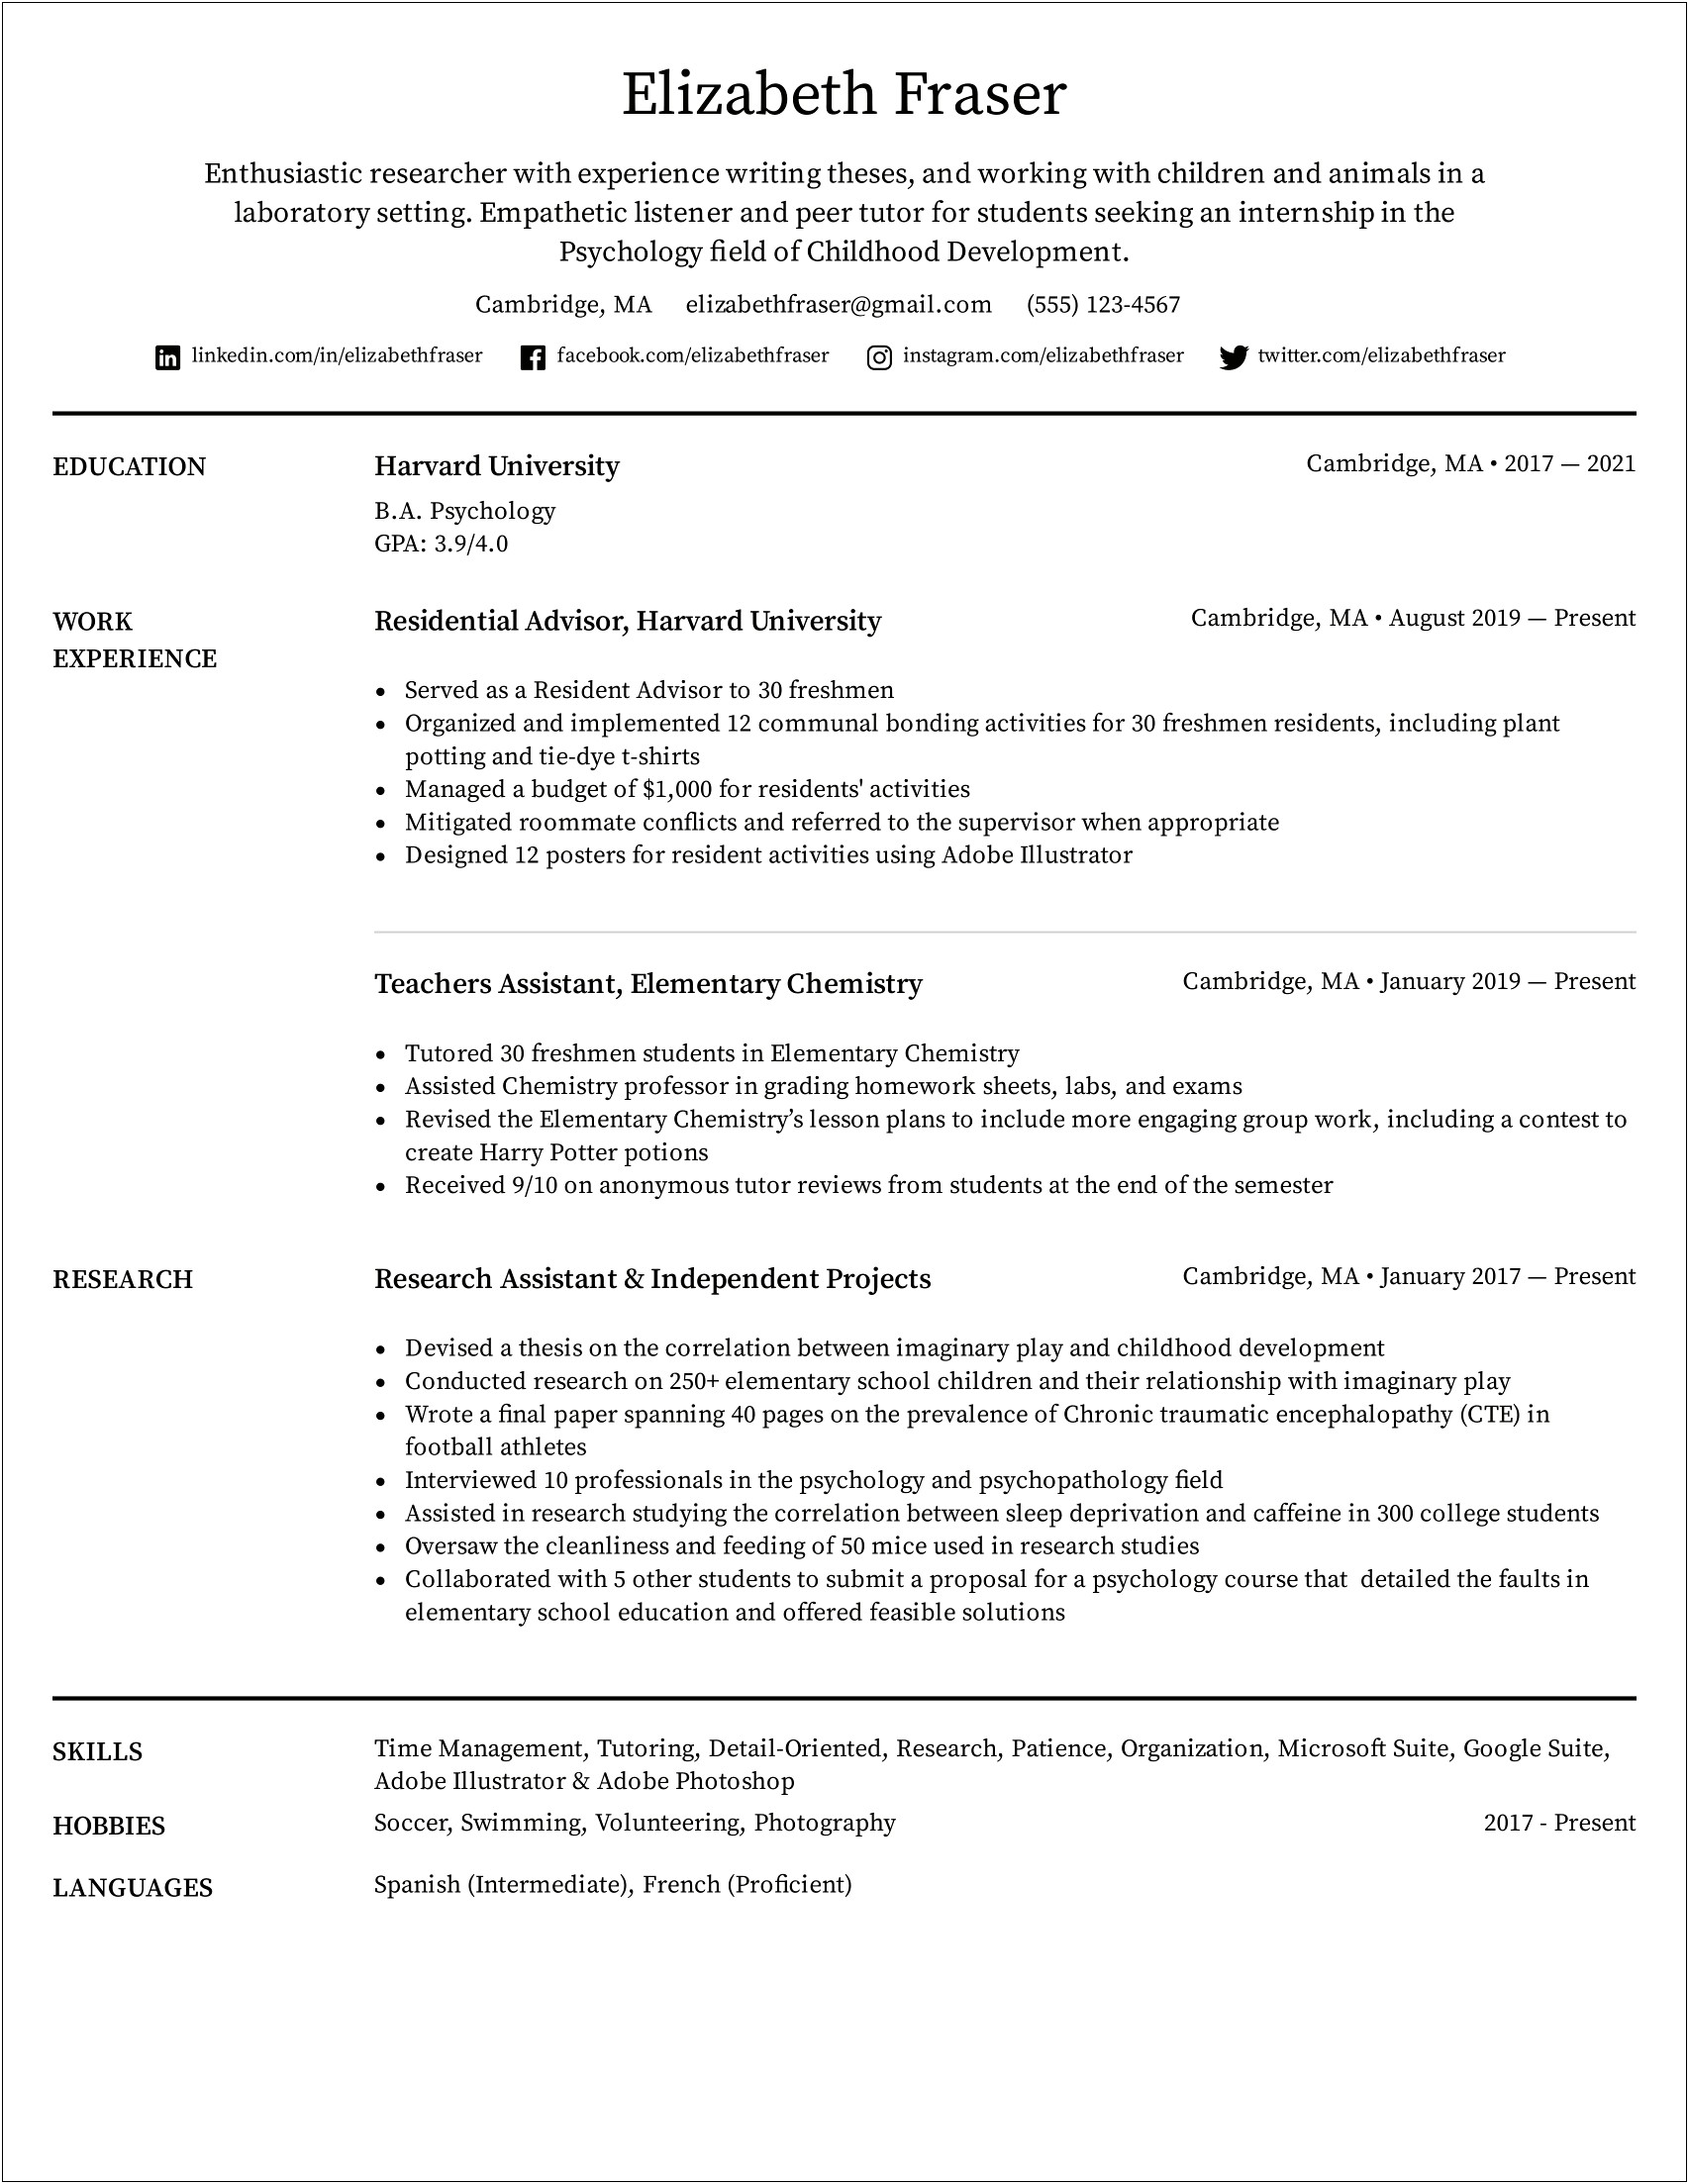 Examples Of Listing Education On Resume